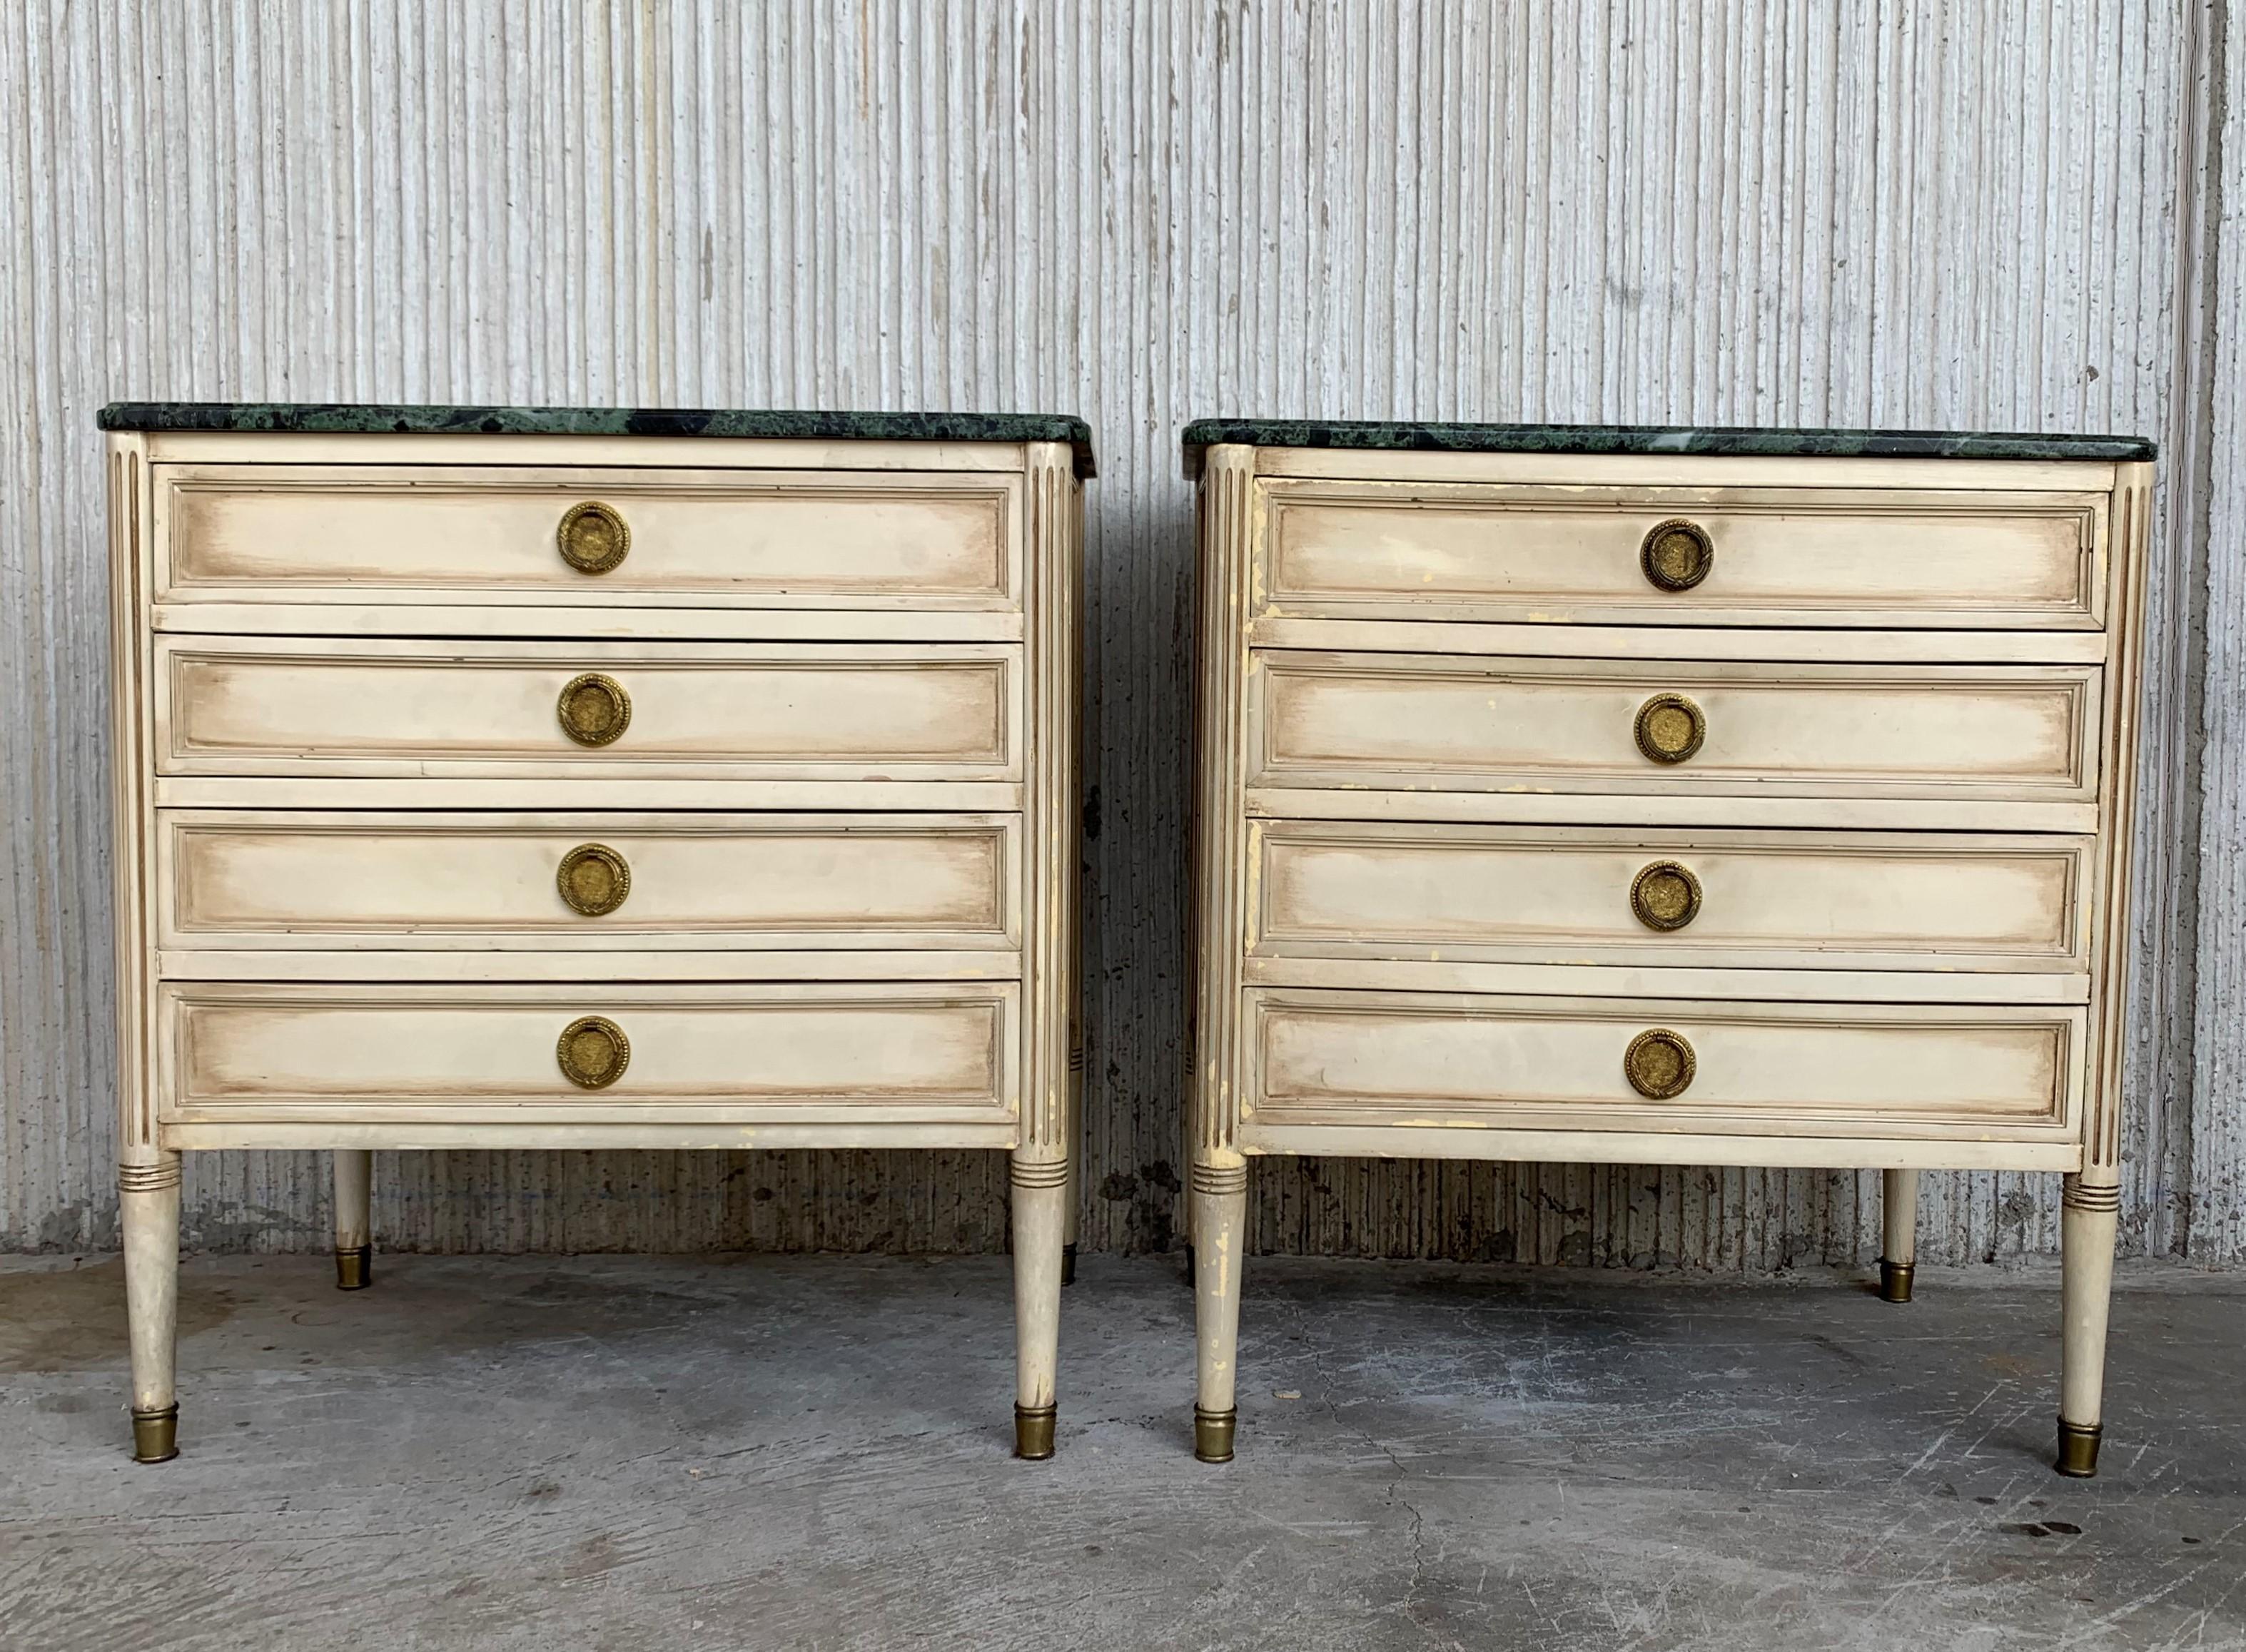 20th century pair of white patina and green marble nightstands.